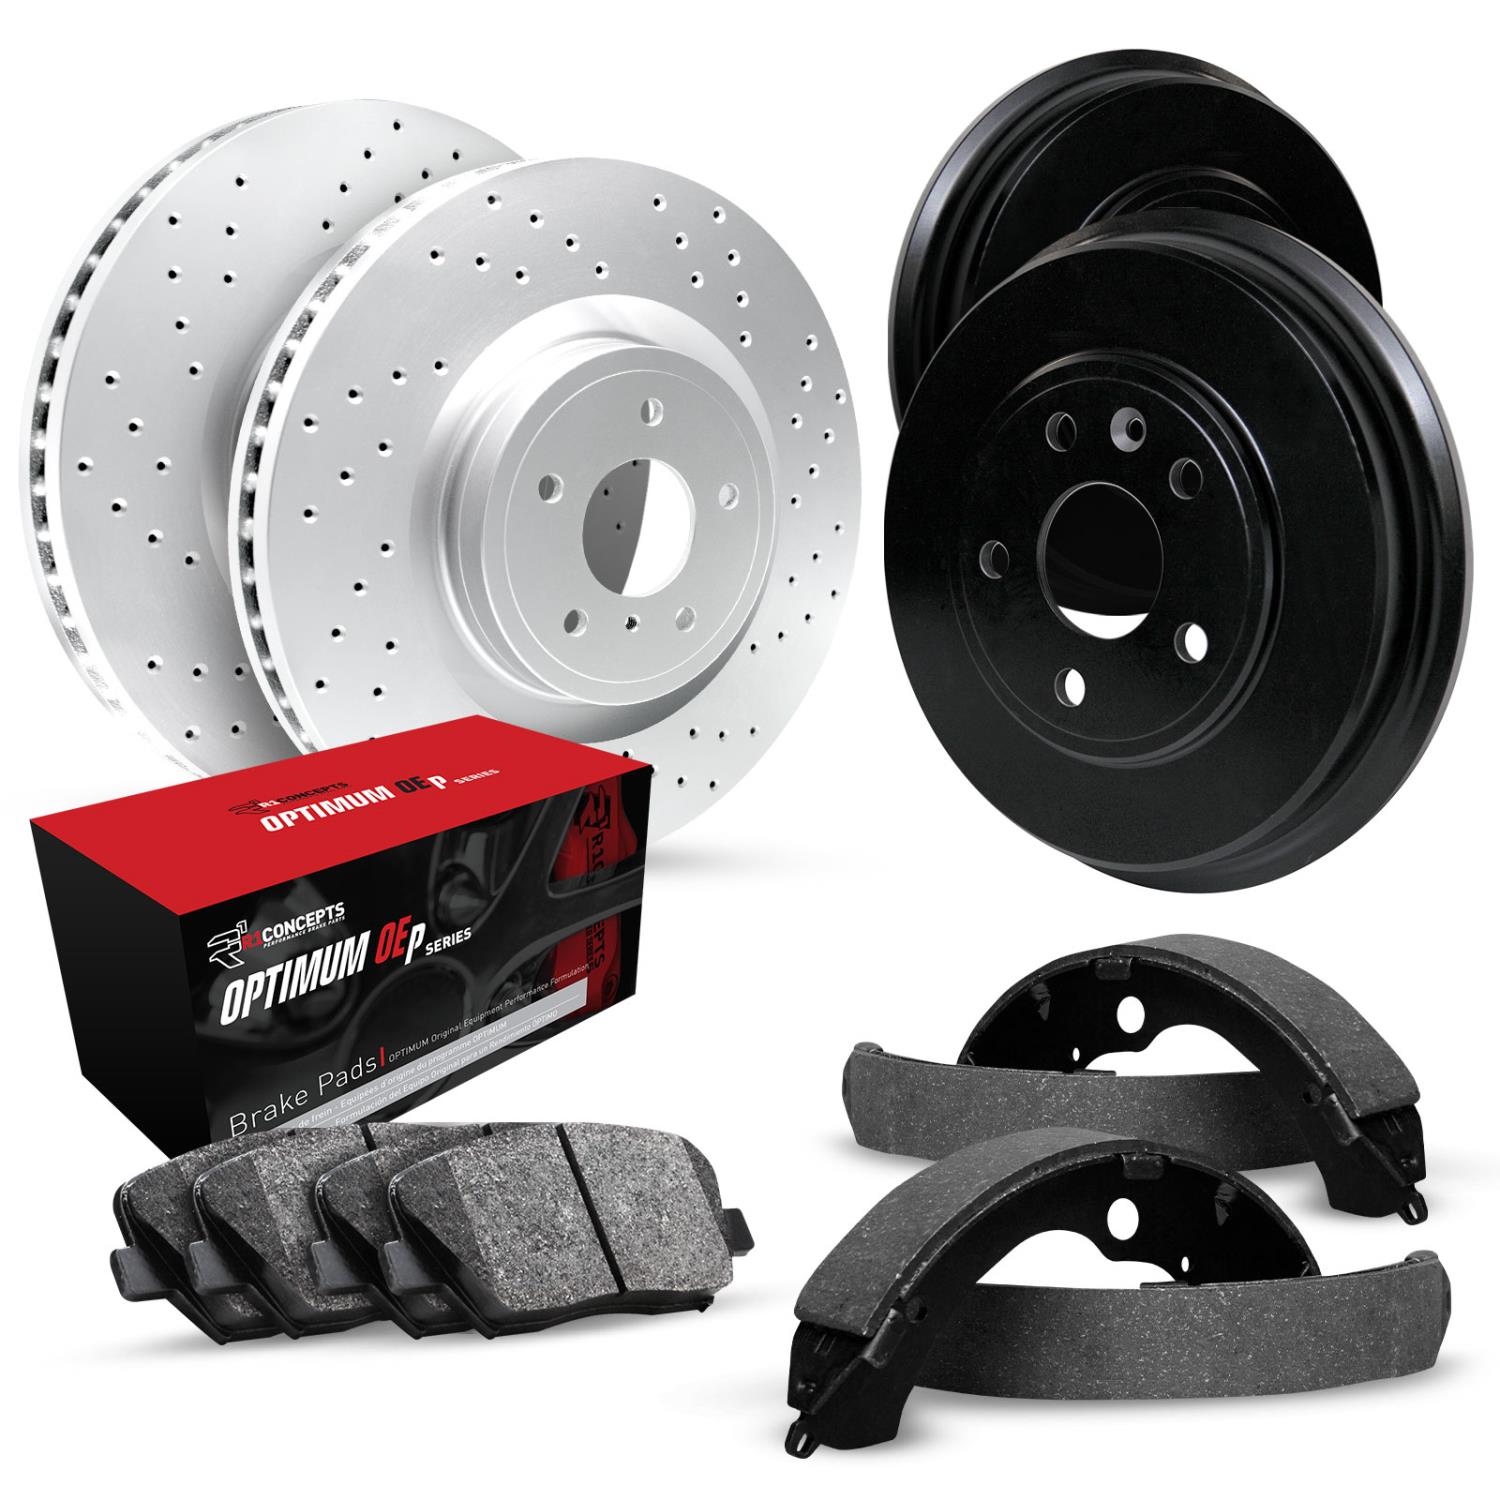 GEO-Carbon Drilled Brake Rotor & Drum Set w/Optimum OE Pads & Shoes, 1978-1993 GM, Position: Front & Rear